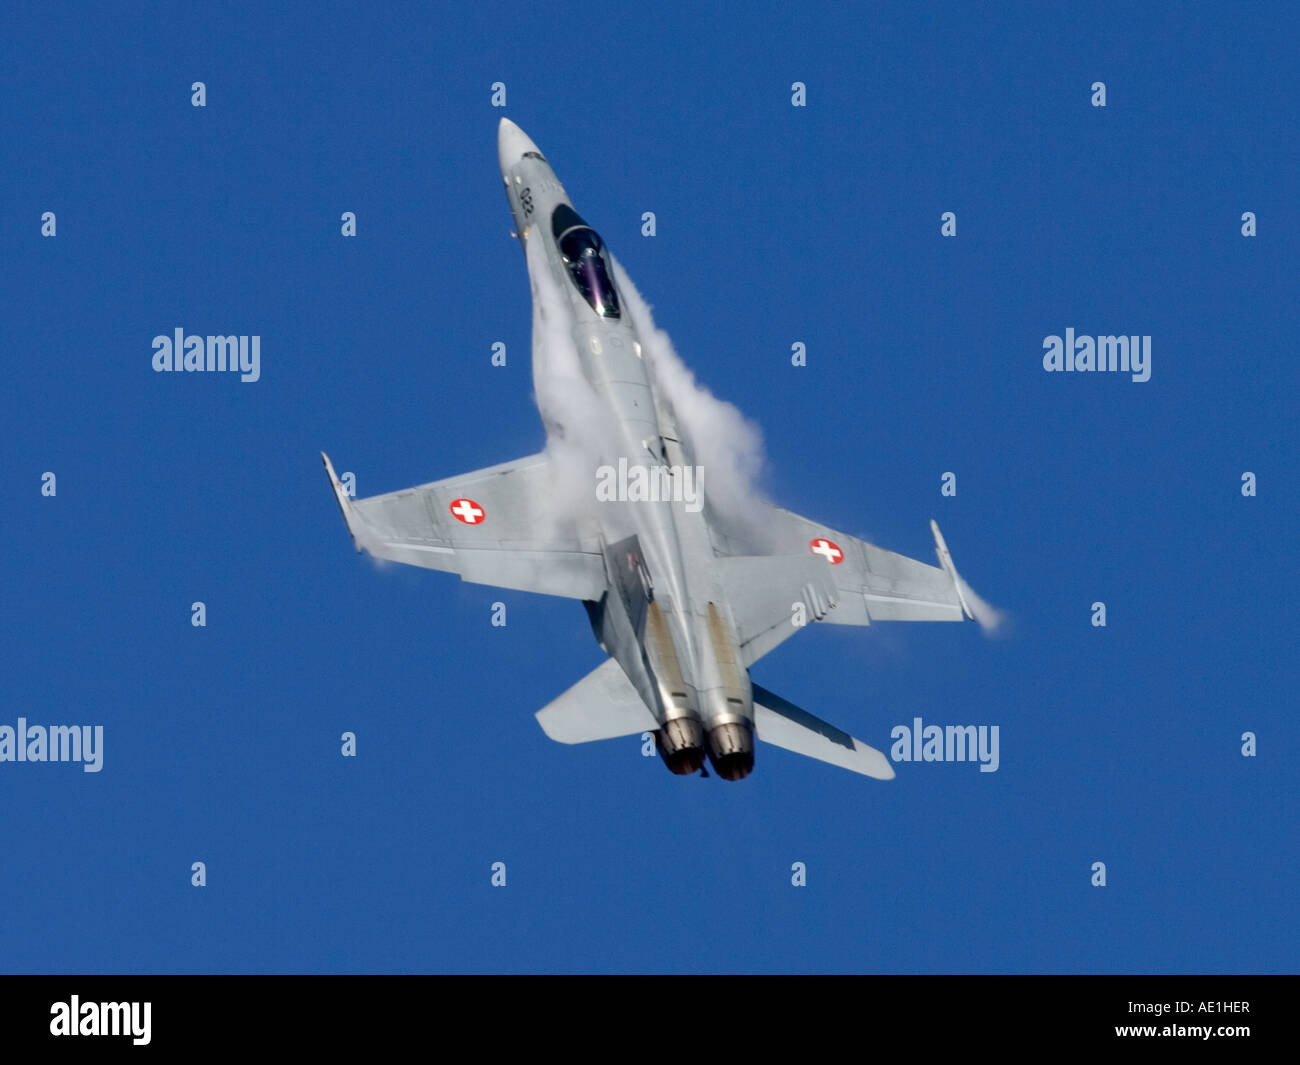 Airforce F18 FA18 Super Hornet speed blue sky Foto Stock